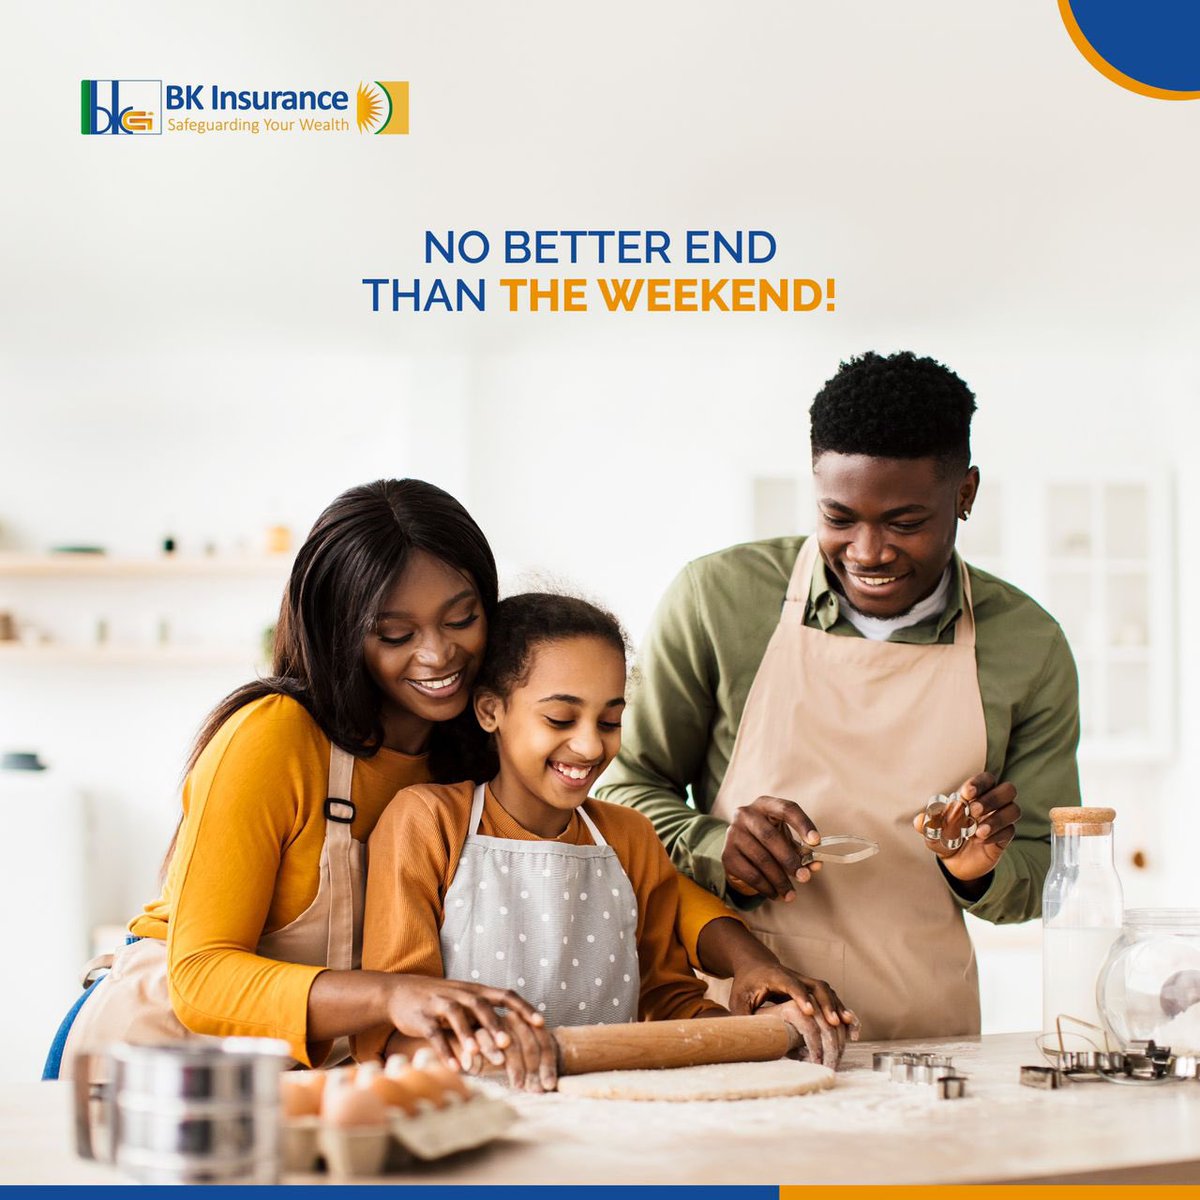 And how else would one spend it than with their loved ones doing what they love the most! Happy First Saturday of April. #BKInsurance #Rwot #RwoX